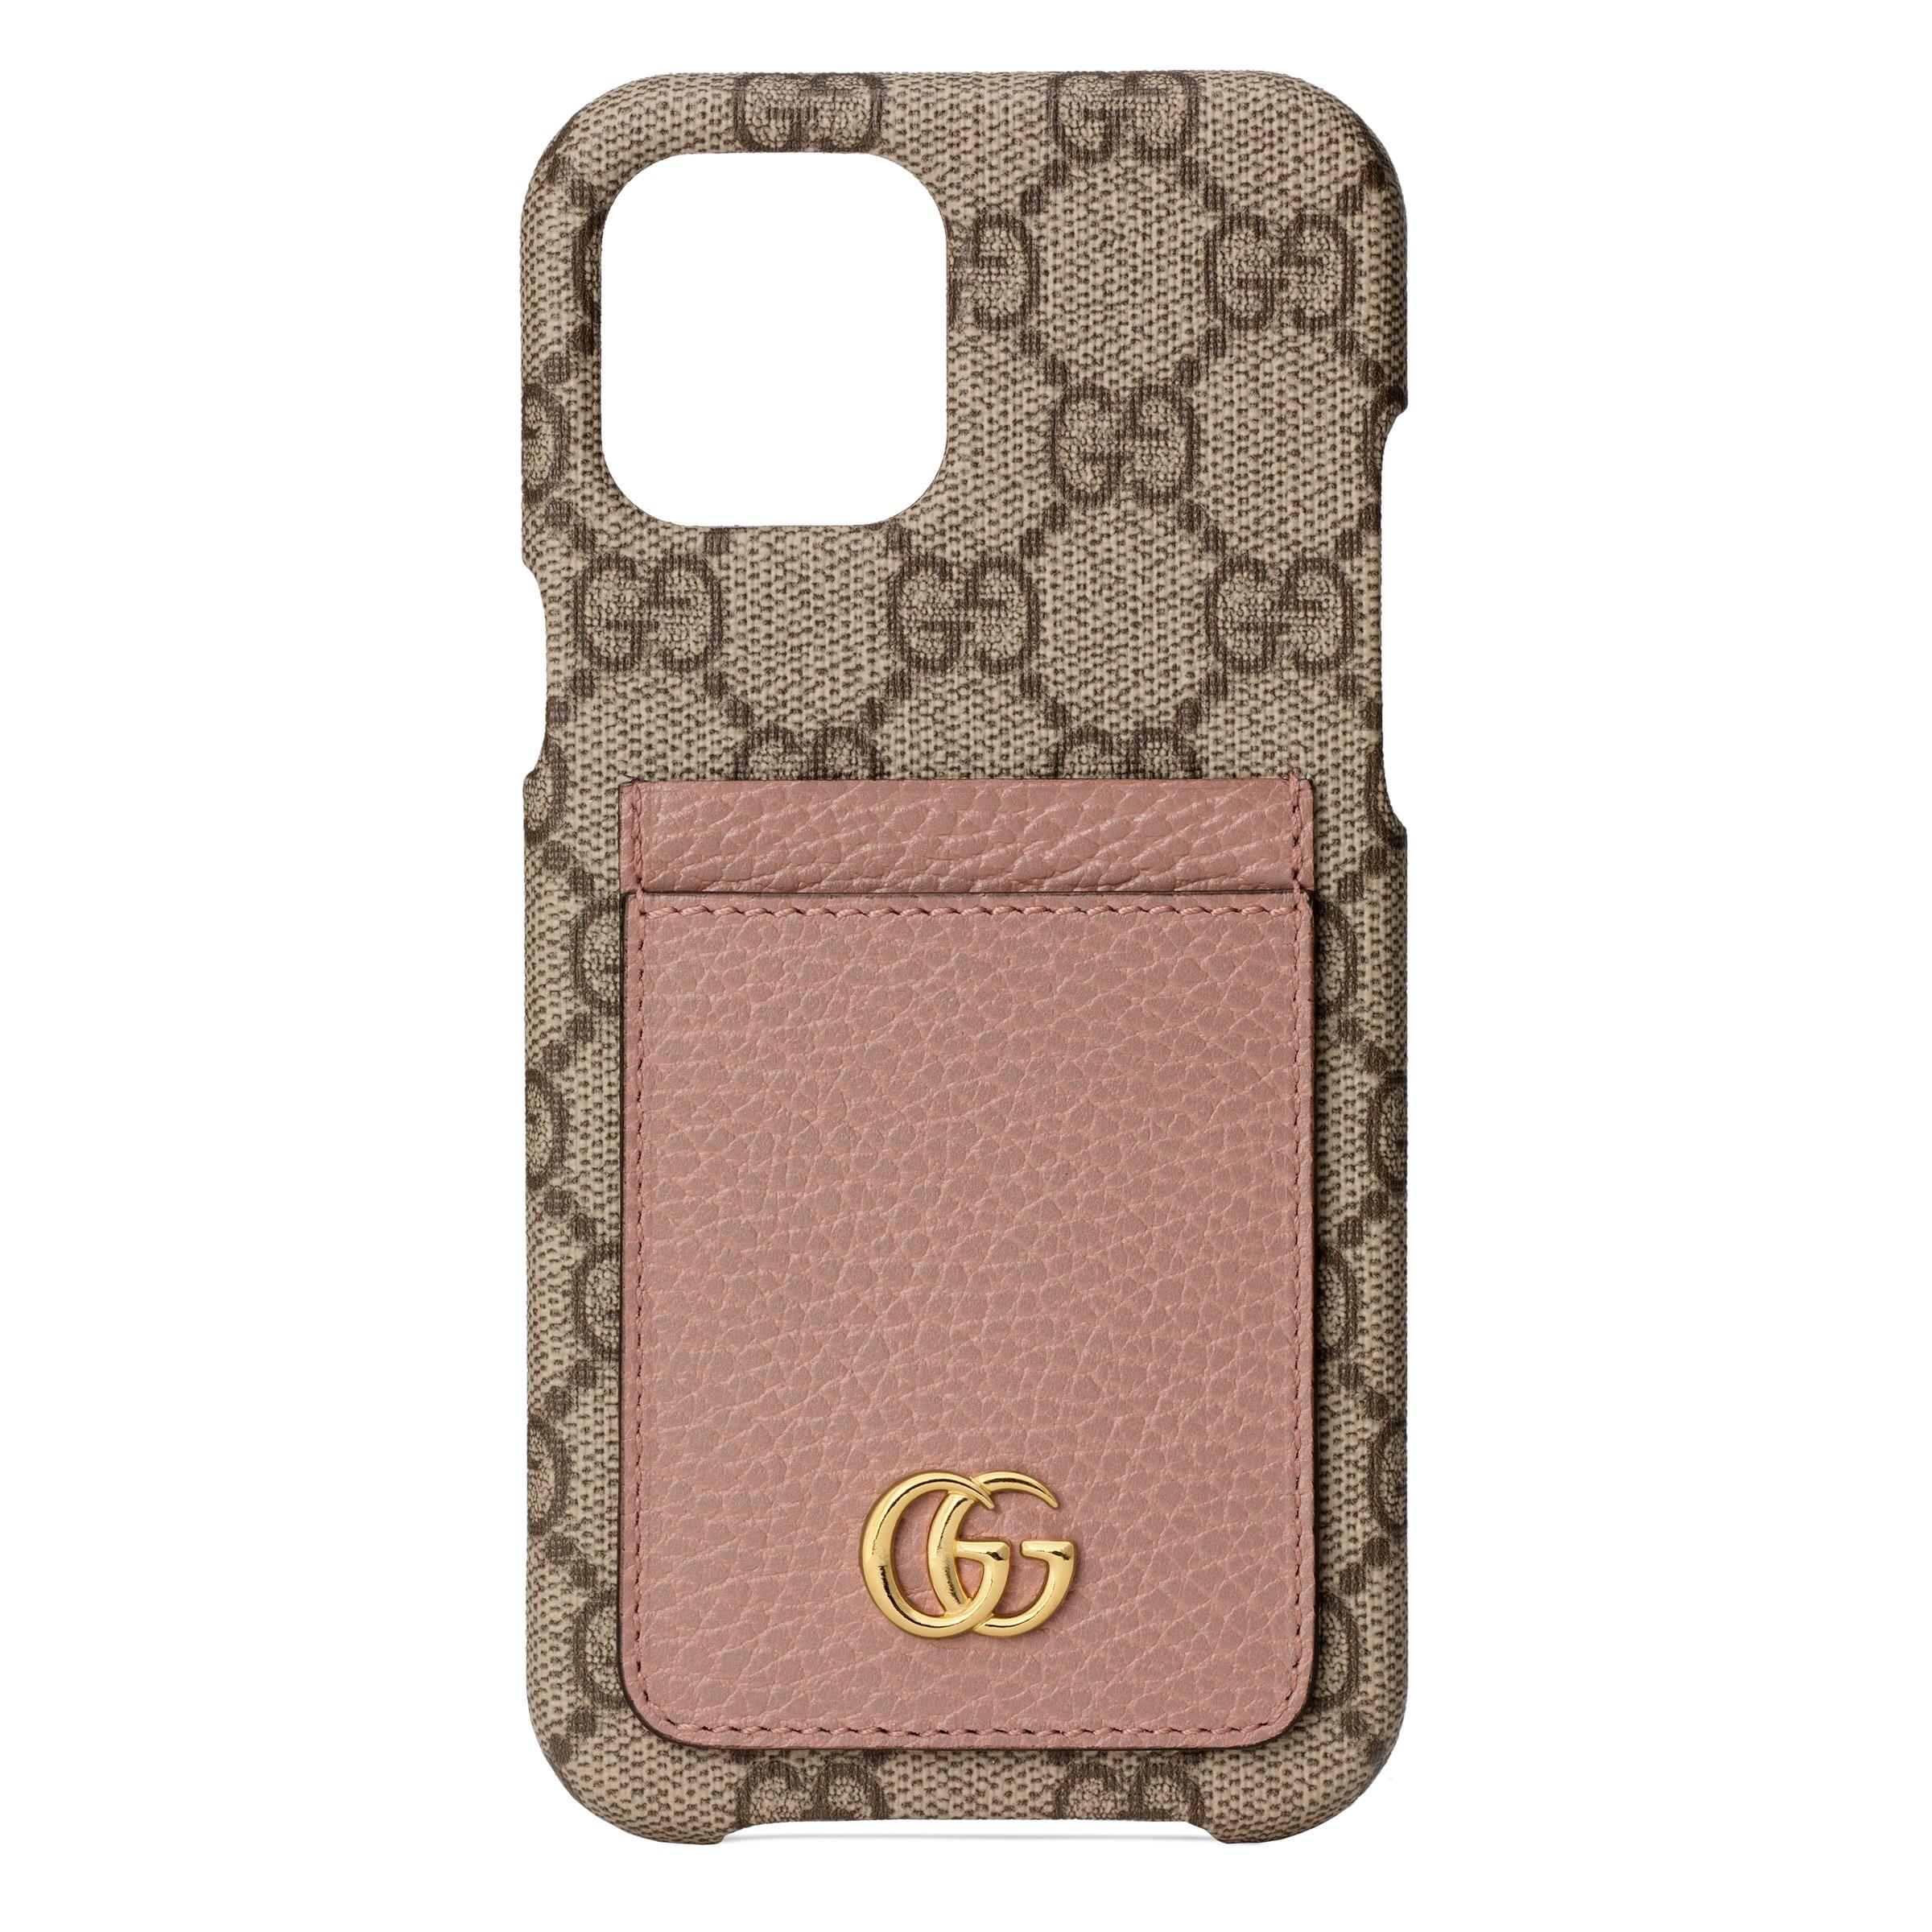 Gucci GG Marmont Case For Iphone 12 Pro Max in Natural | Lyst